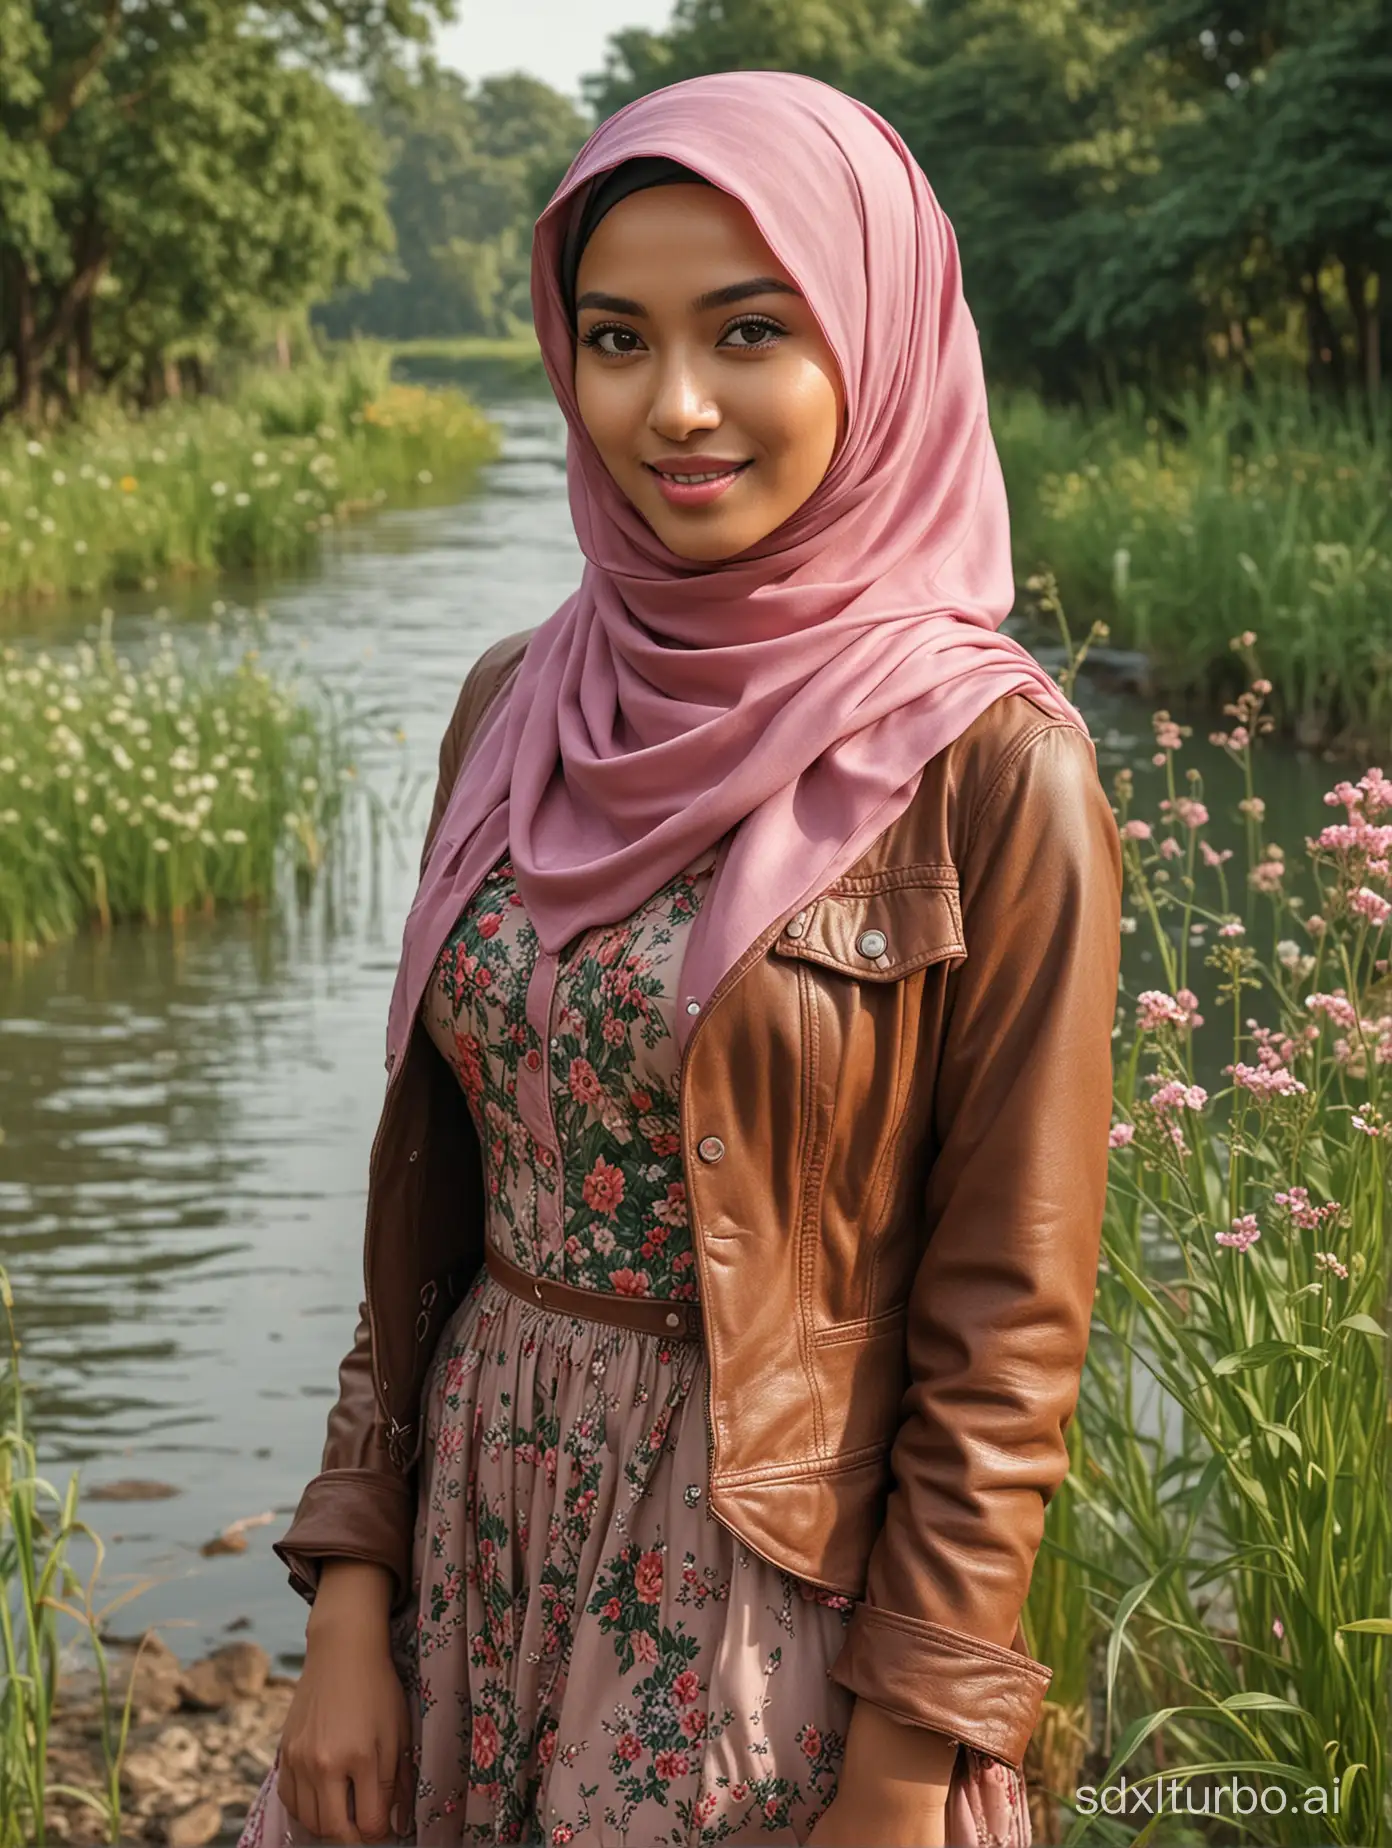 Indonesian-Woman-in-Stylish-Hijab-by-Riverbank-with-Pink-Flowers